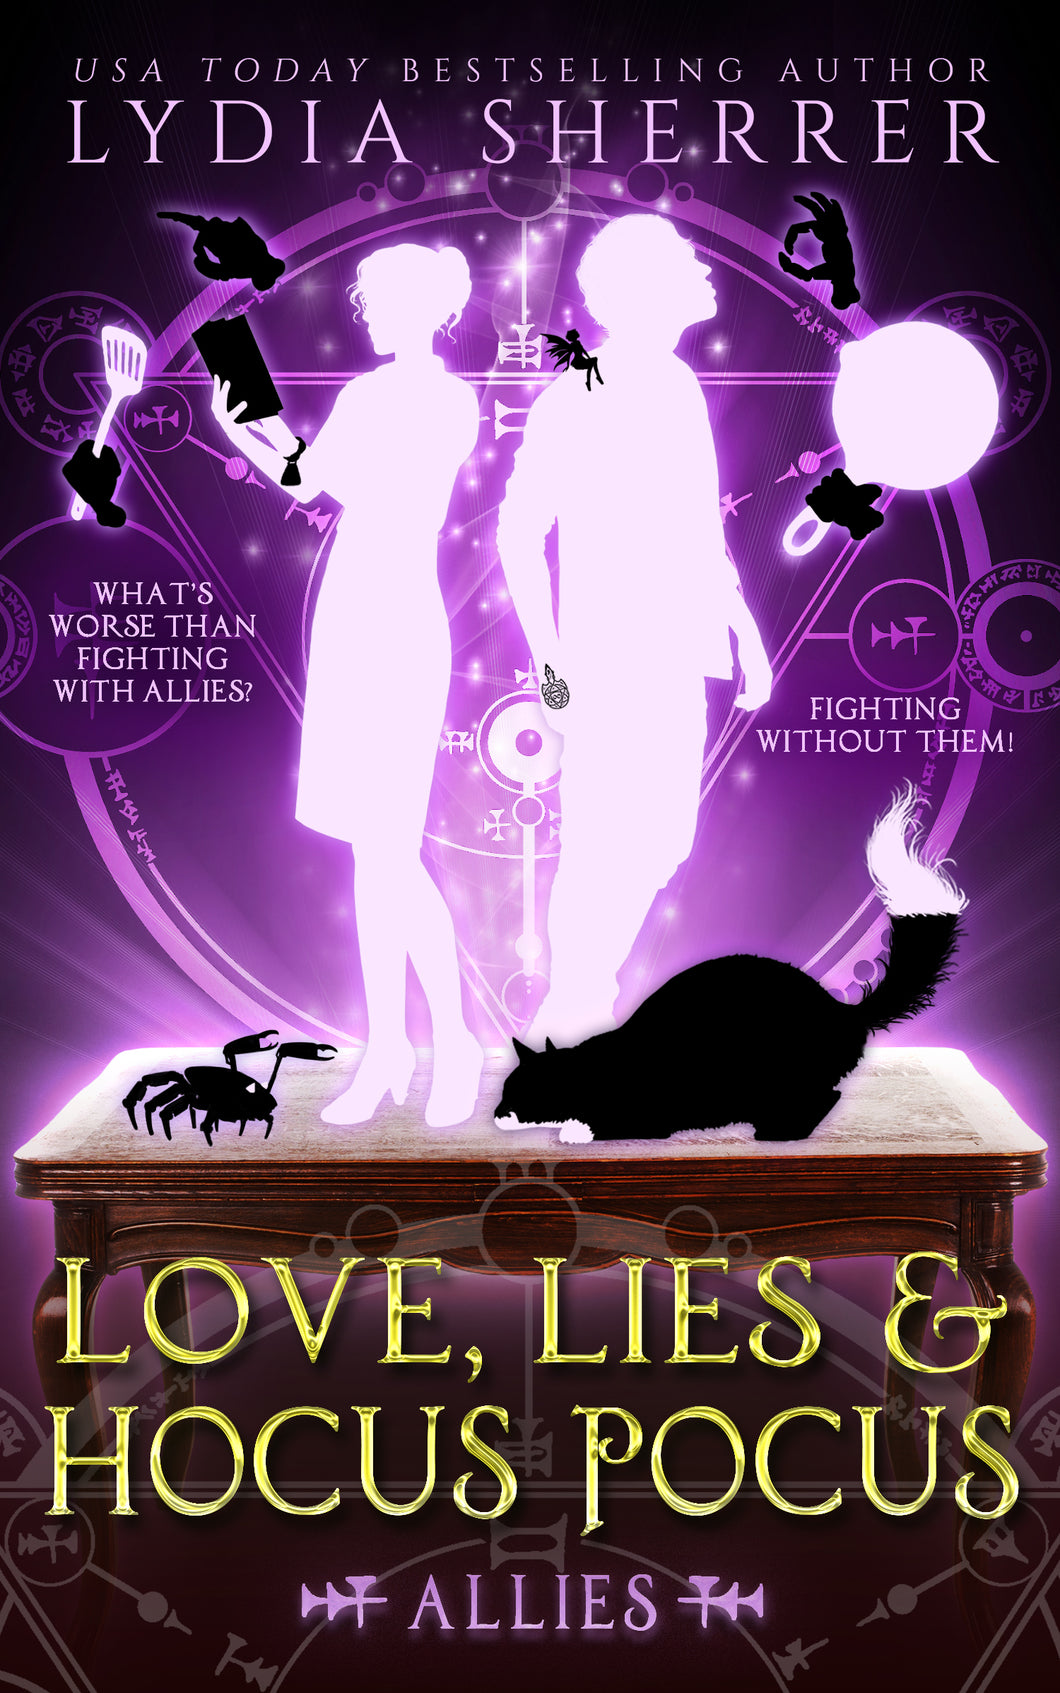 Paperback Book - Love, Lies, and Hocus Pocus Allies (Book 3 The Lily Singer Adventures)